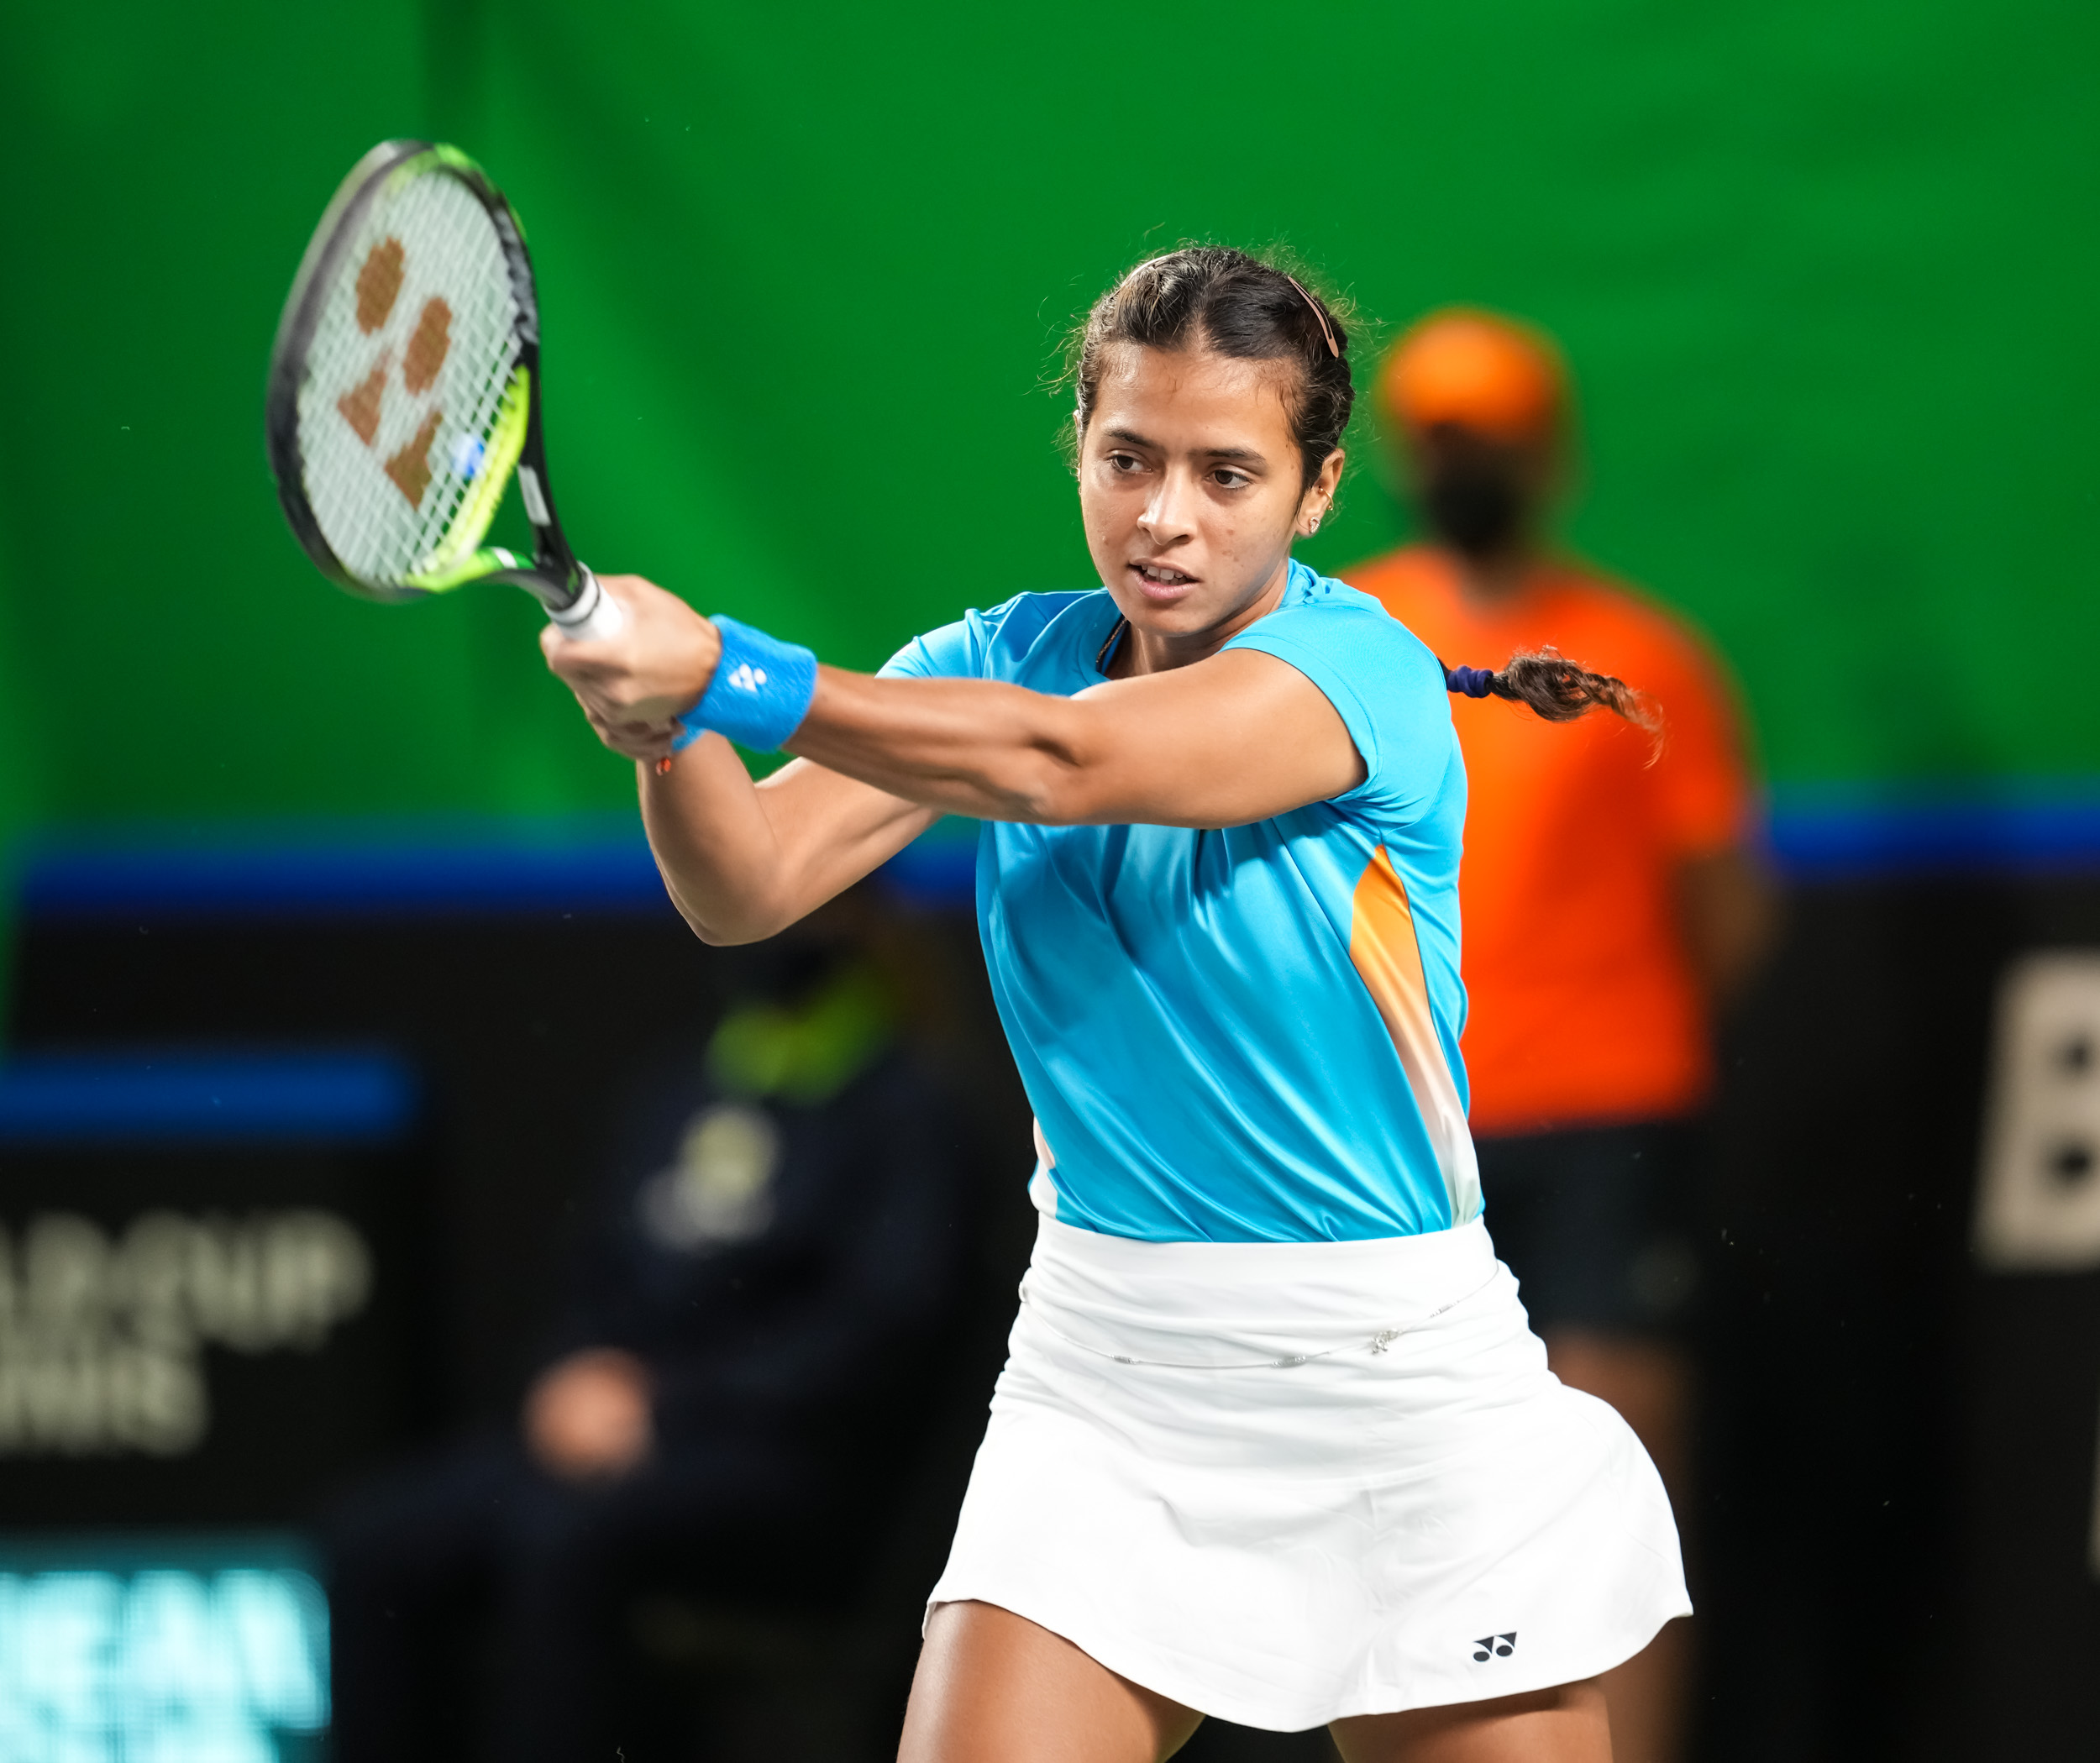 “I could have been more aggressive when I had chances to close the set” – Ankita Raina after her close loss to Sevastova